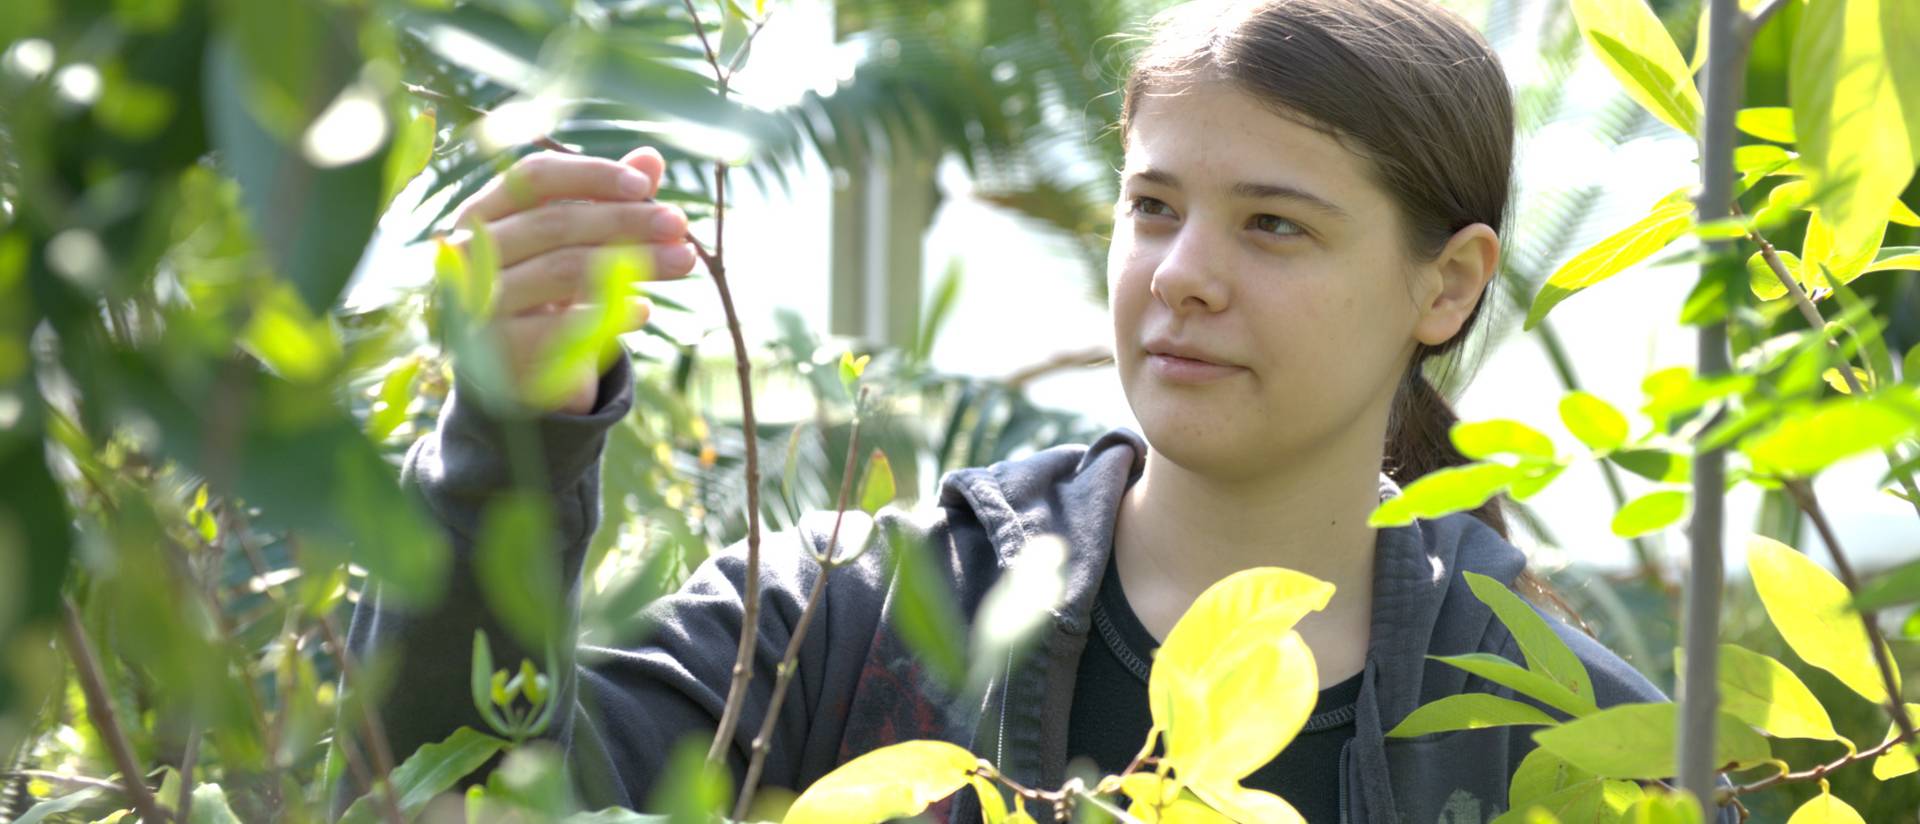 UW-Eau Claire biology student inspecting leaves on a plant in one of our three greenhouses on campus